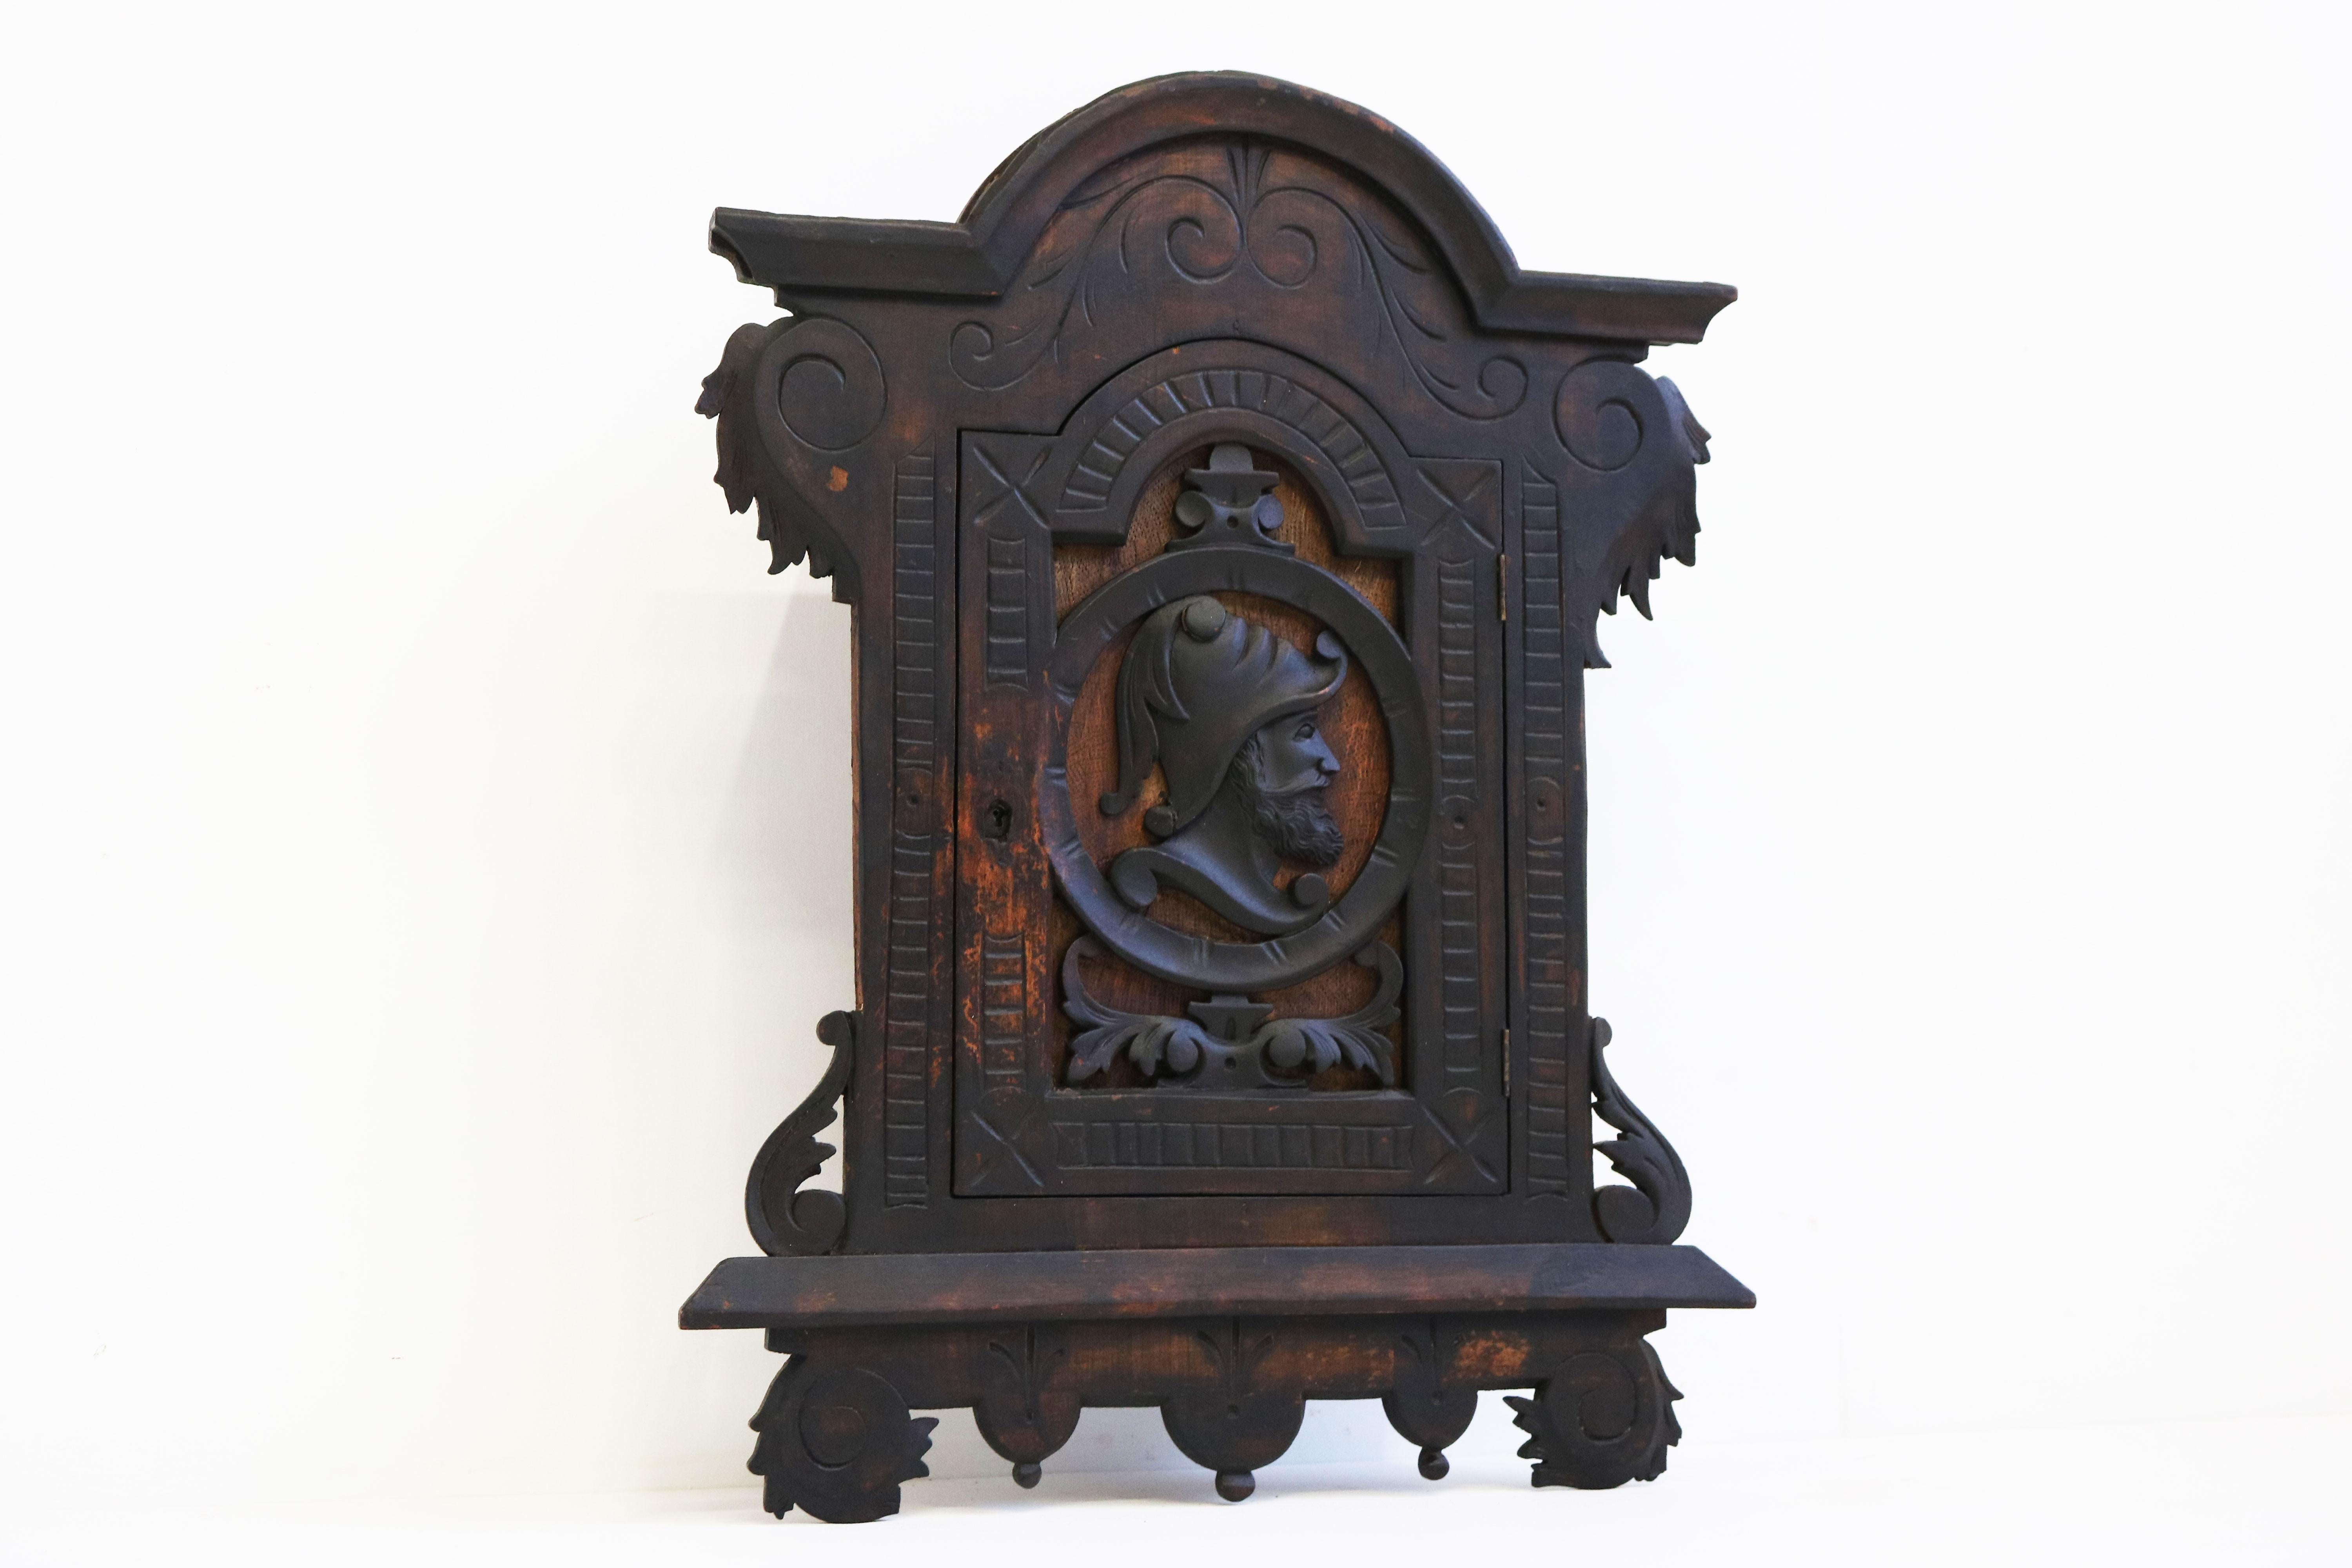 Exquisite 19th century Spanish colonial wall cabinet with a striking dark patina & carved knight.
Very nice small antique that brings the right charm & vibe to any room. 
The interior has 4 compartments for storage. 
The cabinets door is richly